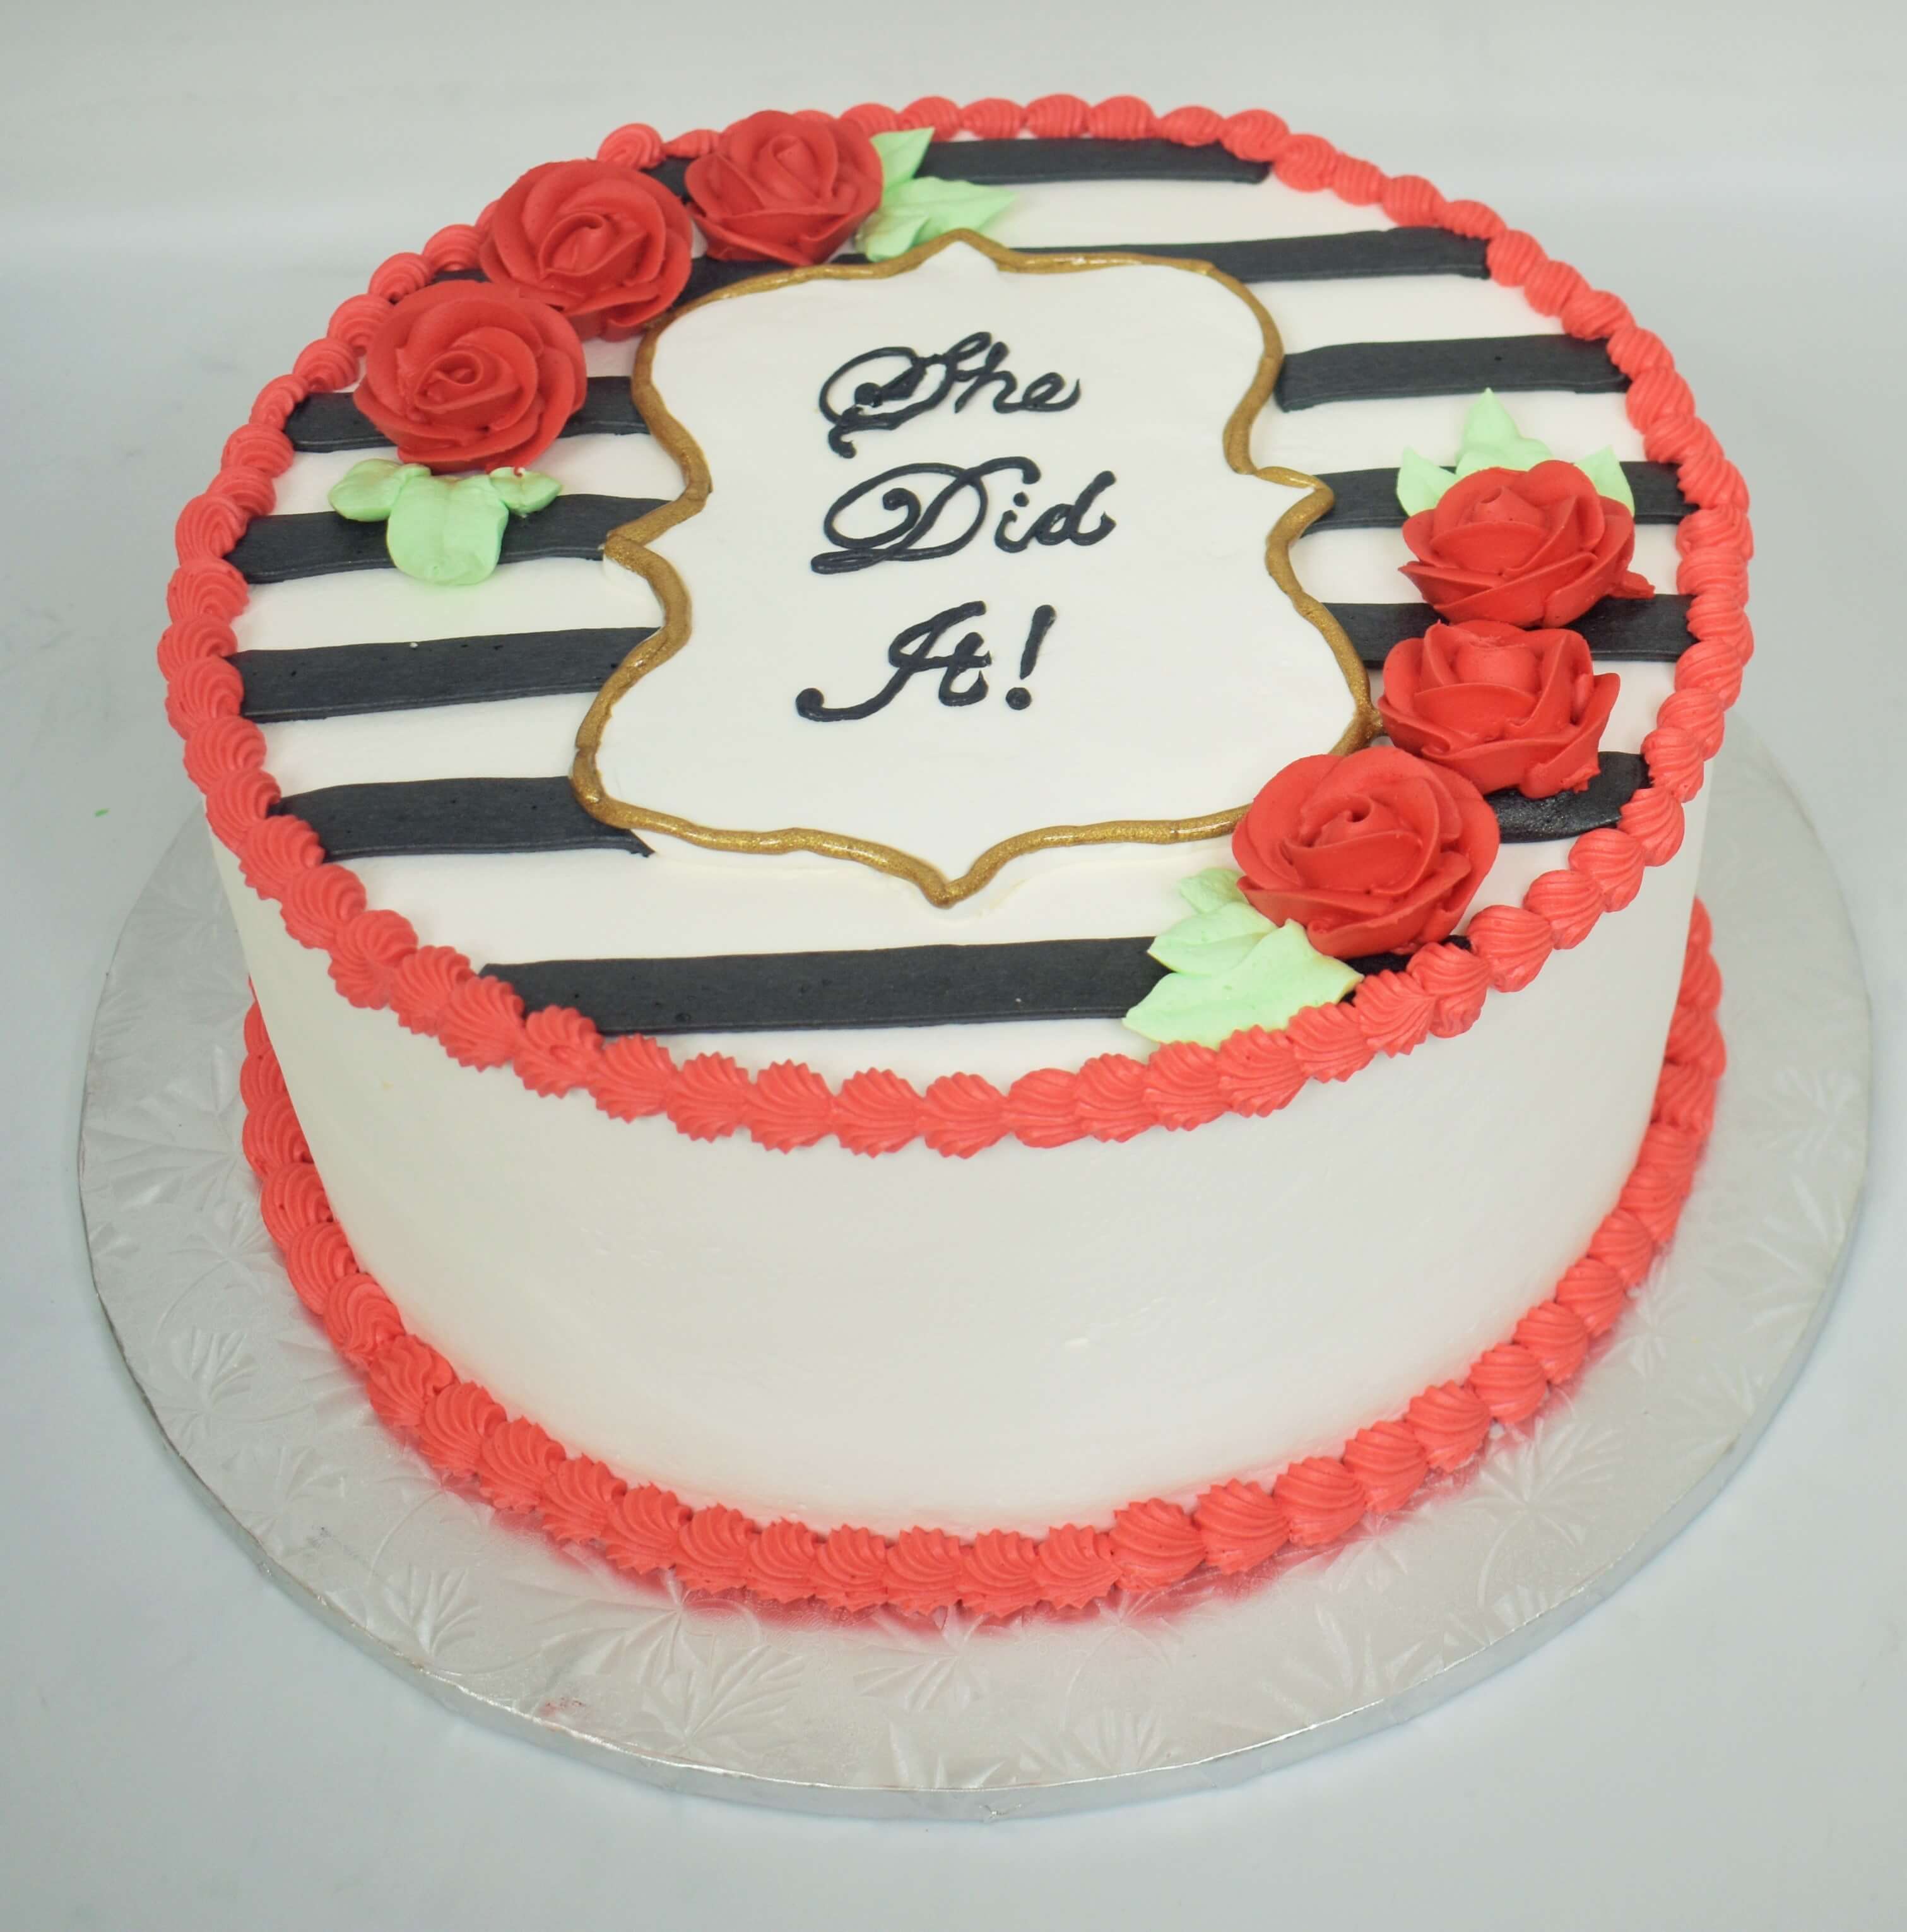 McArthur's Bakery Custom Cake with Black Stripes, Red Roses, Gold Rimmed Plaque